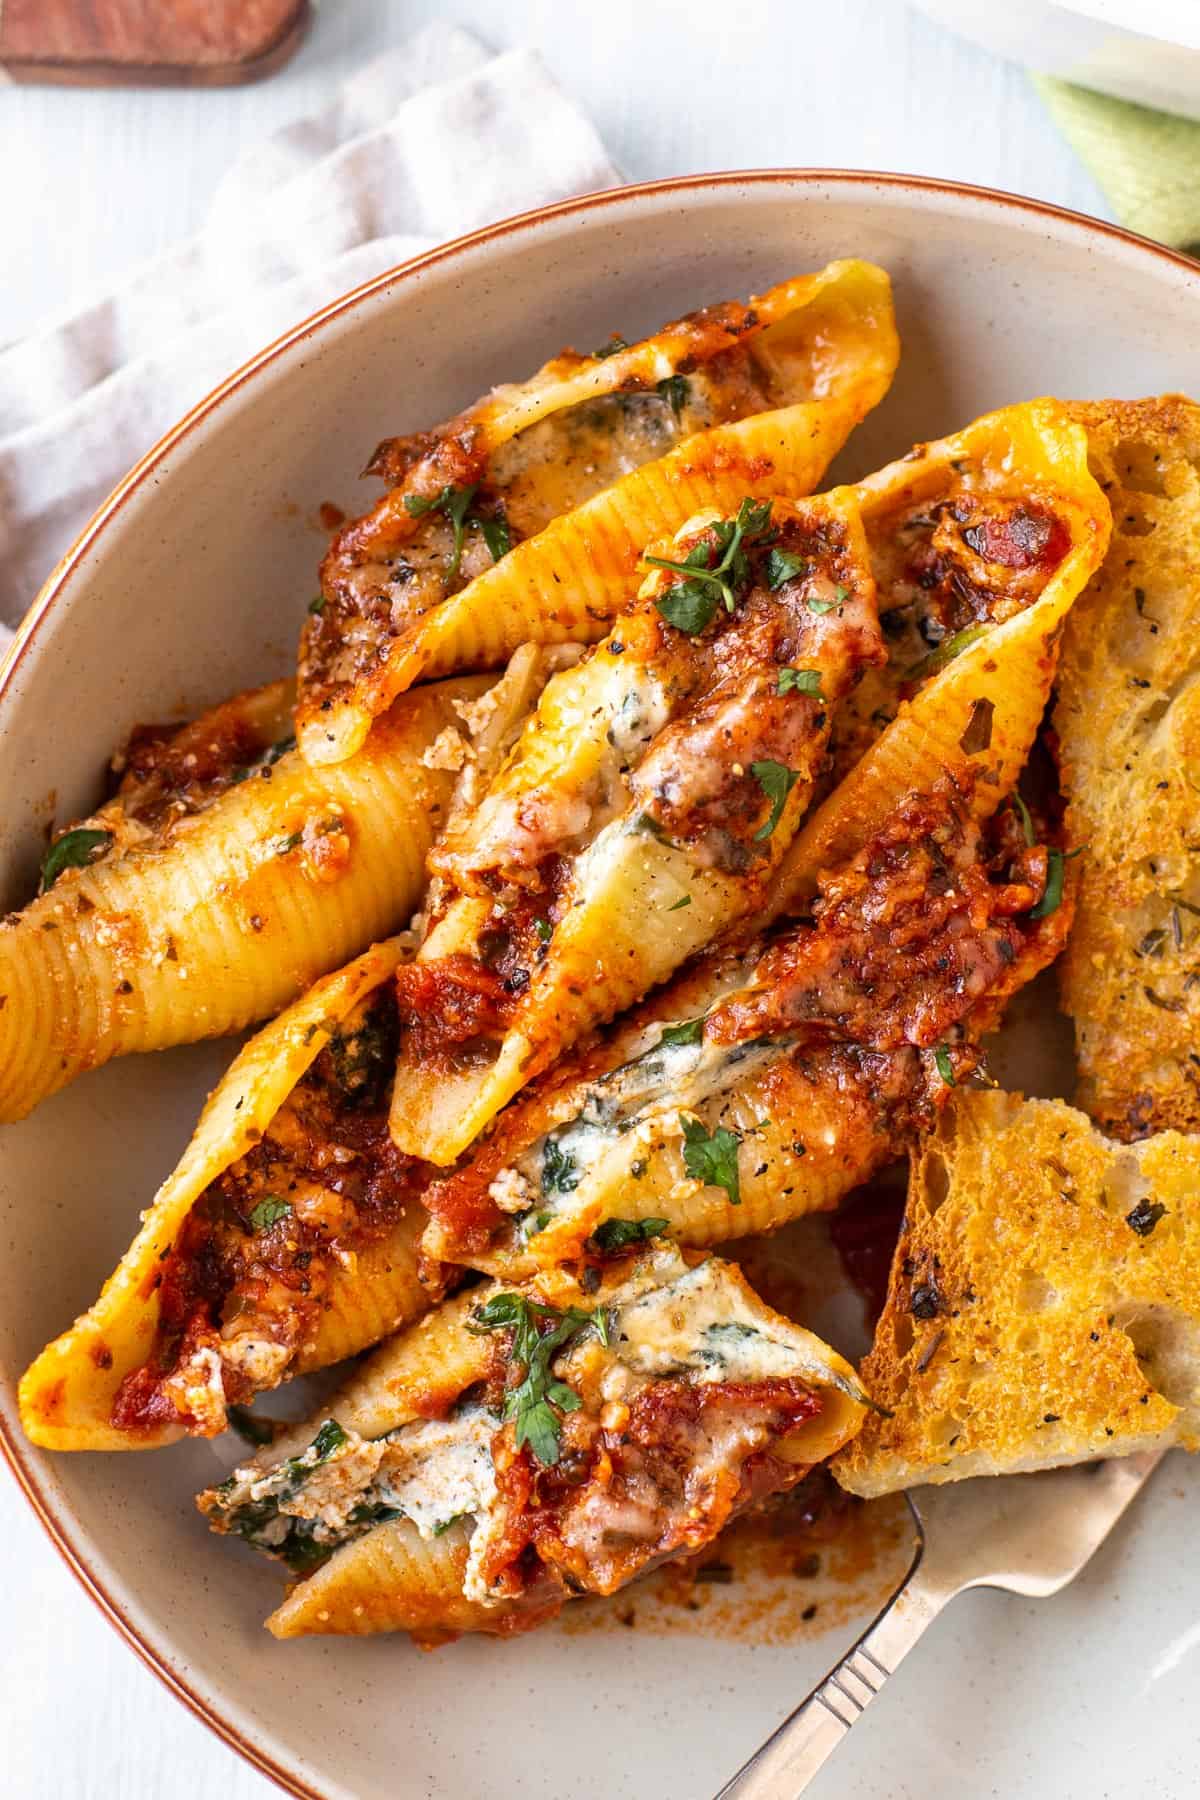 A portion of cheesy spinach stuffed shells in a bowl with garlic bread.